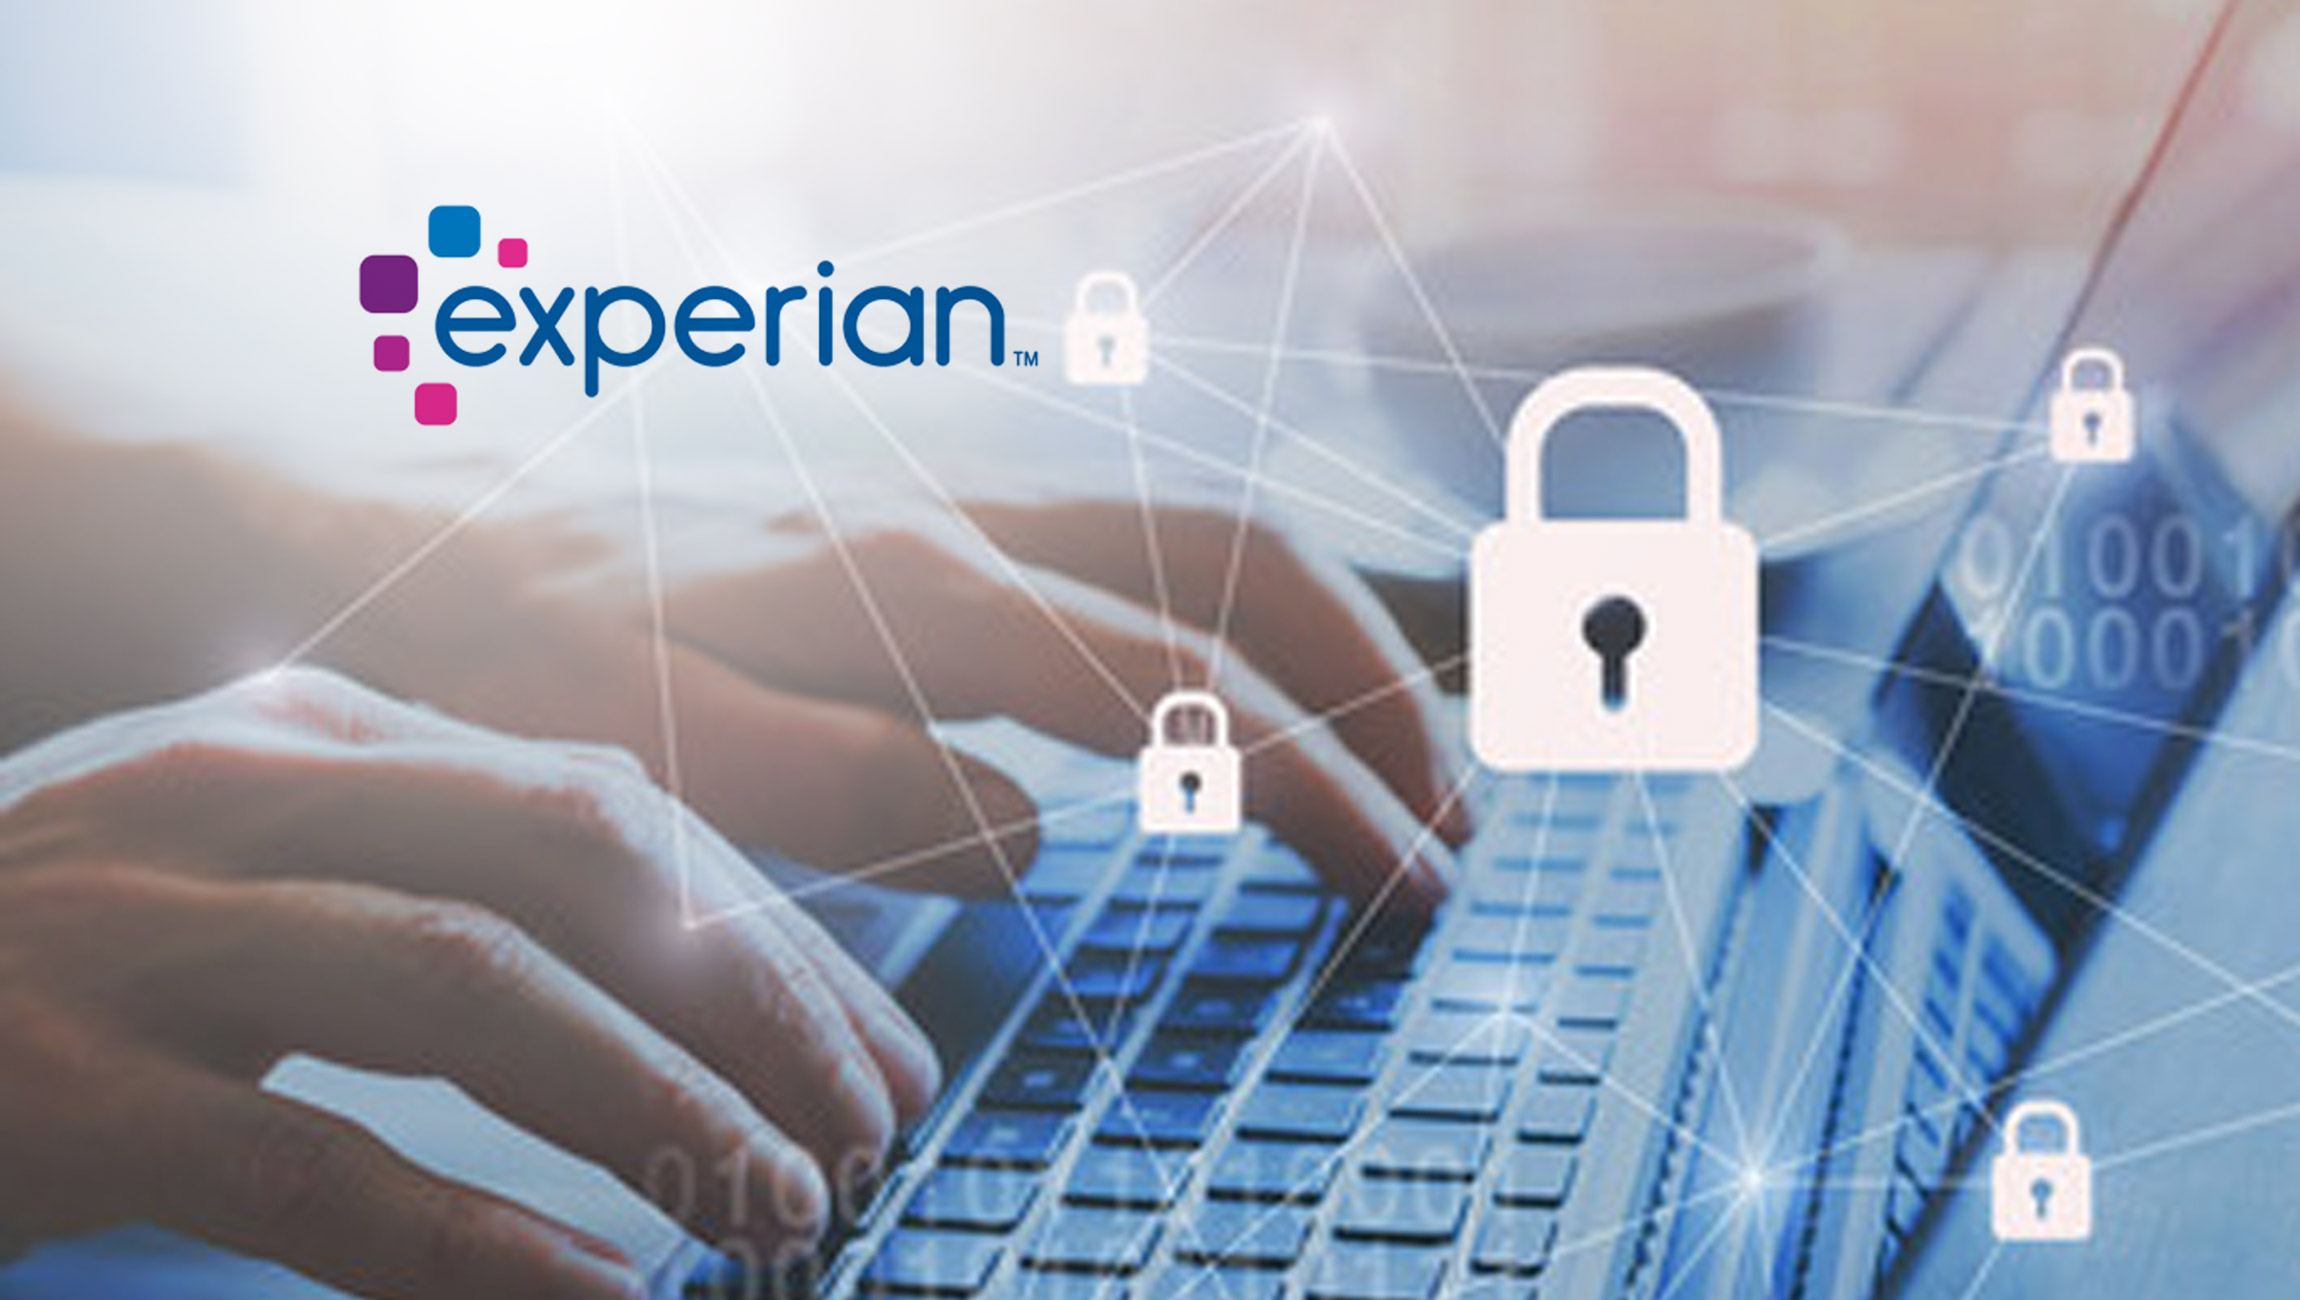 Experian’s-Annual-Future-of-Fraud-Forecast-Predicts-Five-Key-Threats-for-Businesses-and-Consumers-in-2022